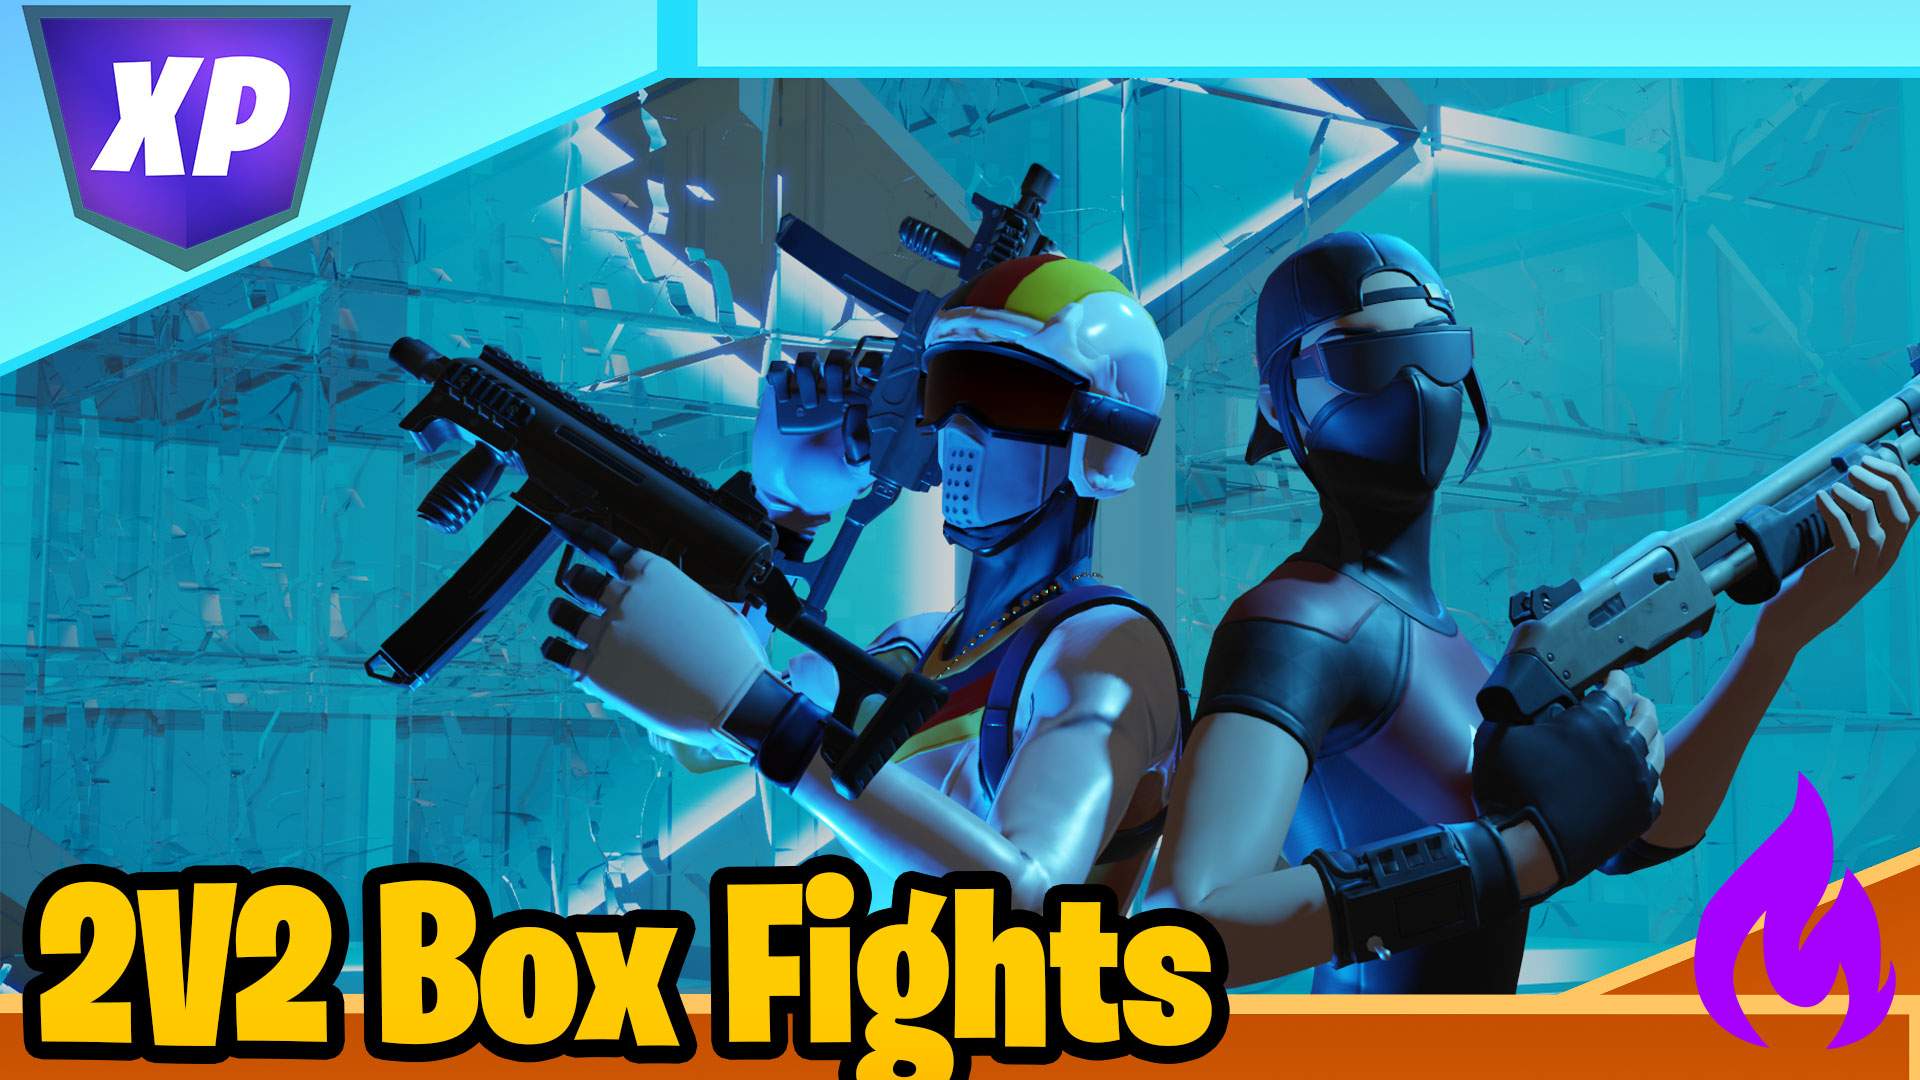 Shadow Boxing 2299-2177-9483 by xotheend - Fortnite Creative Map Code 